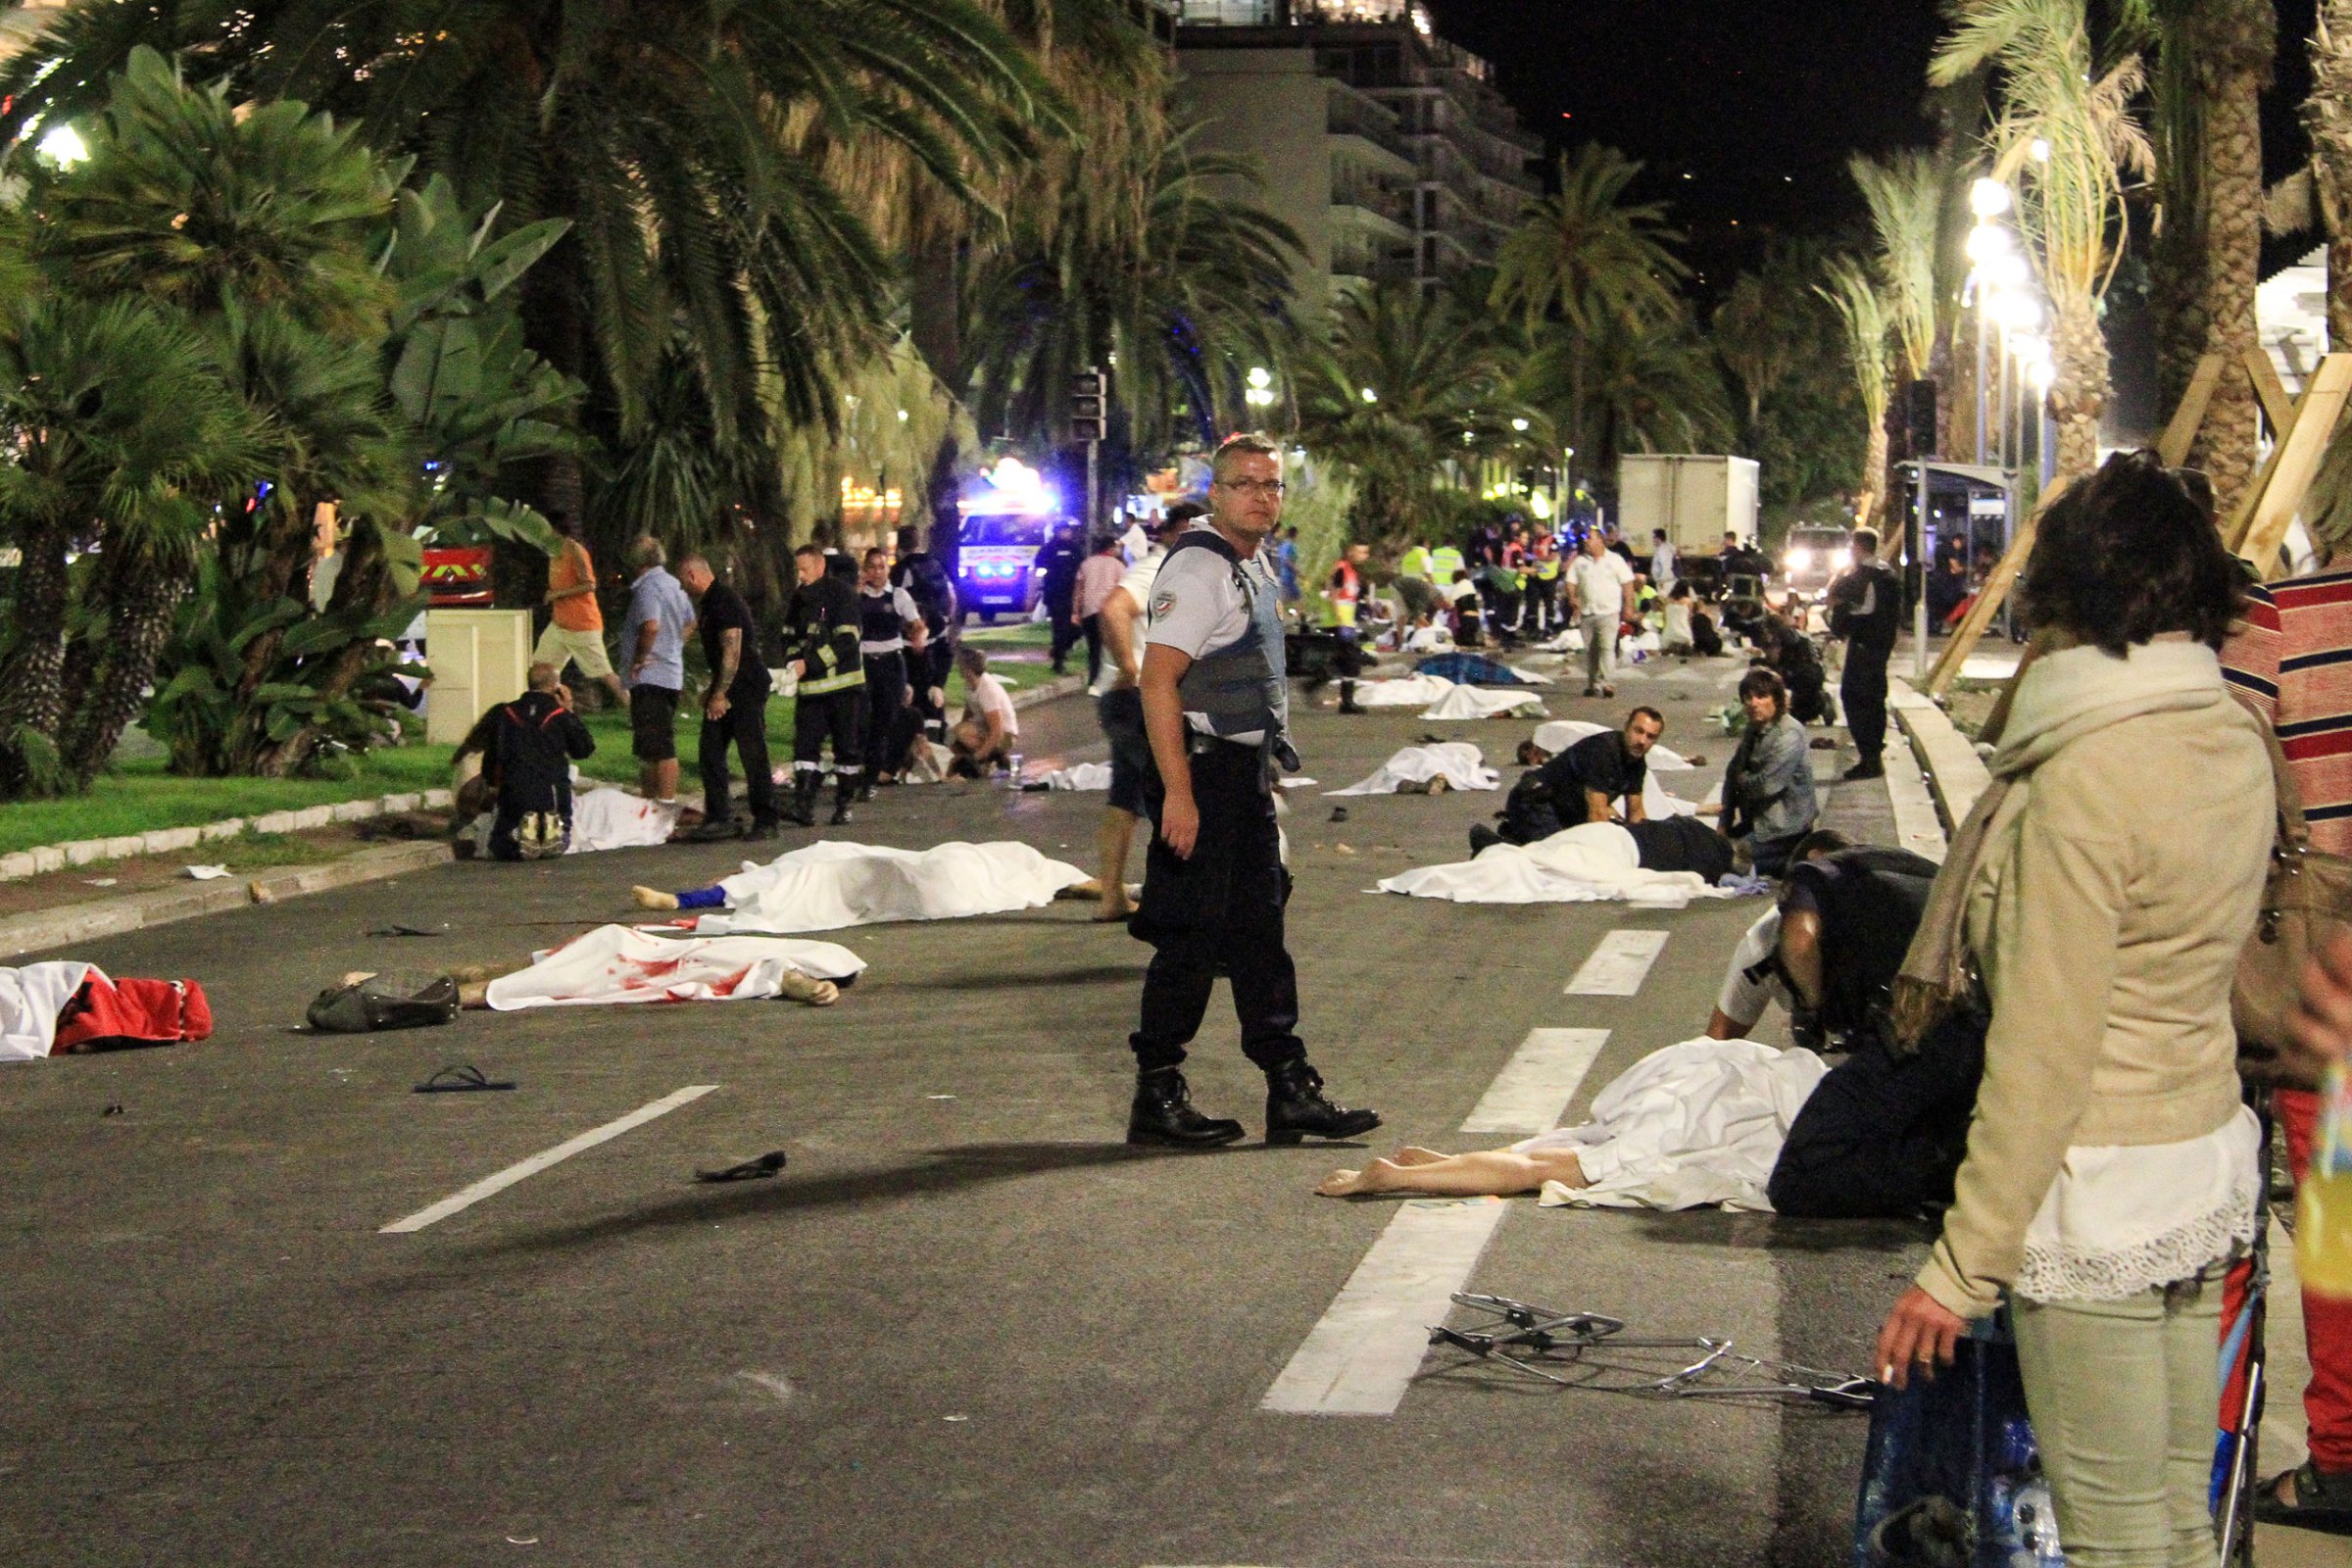 More than 80 people were killed in the July 14 terrorist attack in the southern French city of Nice